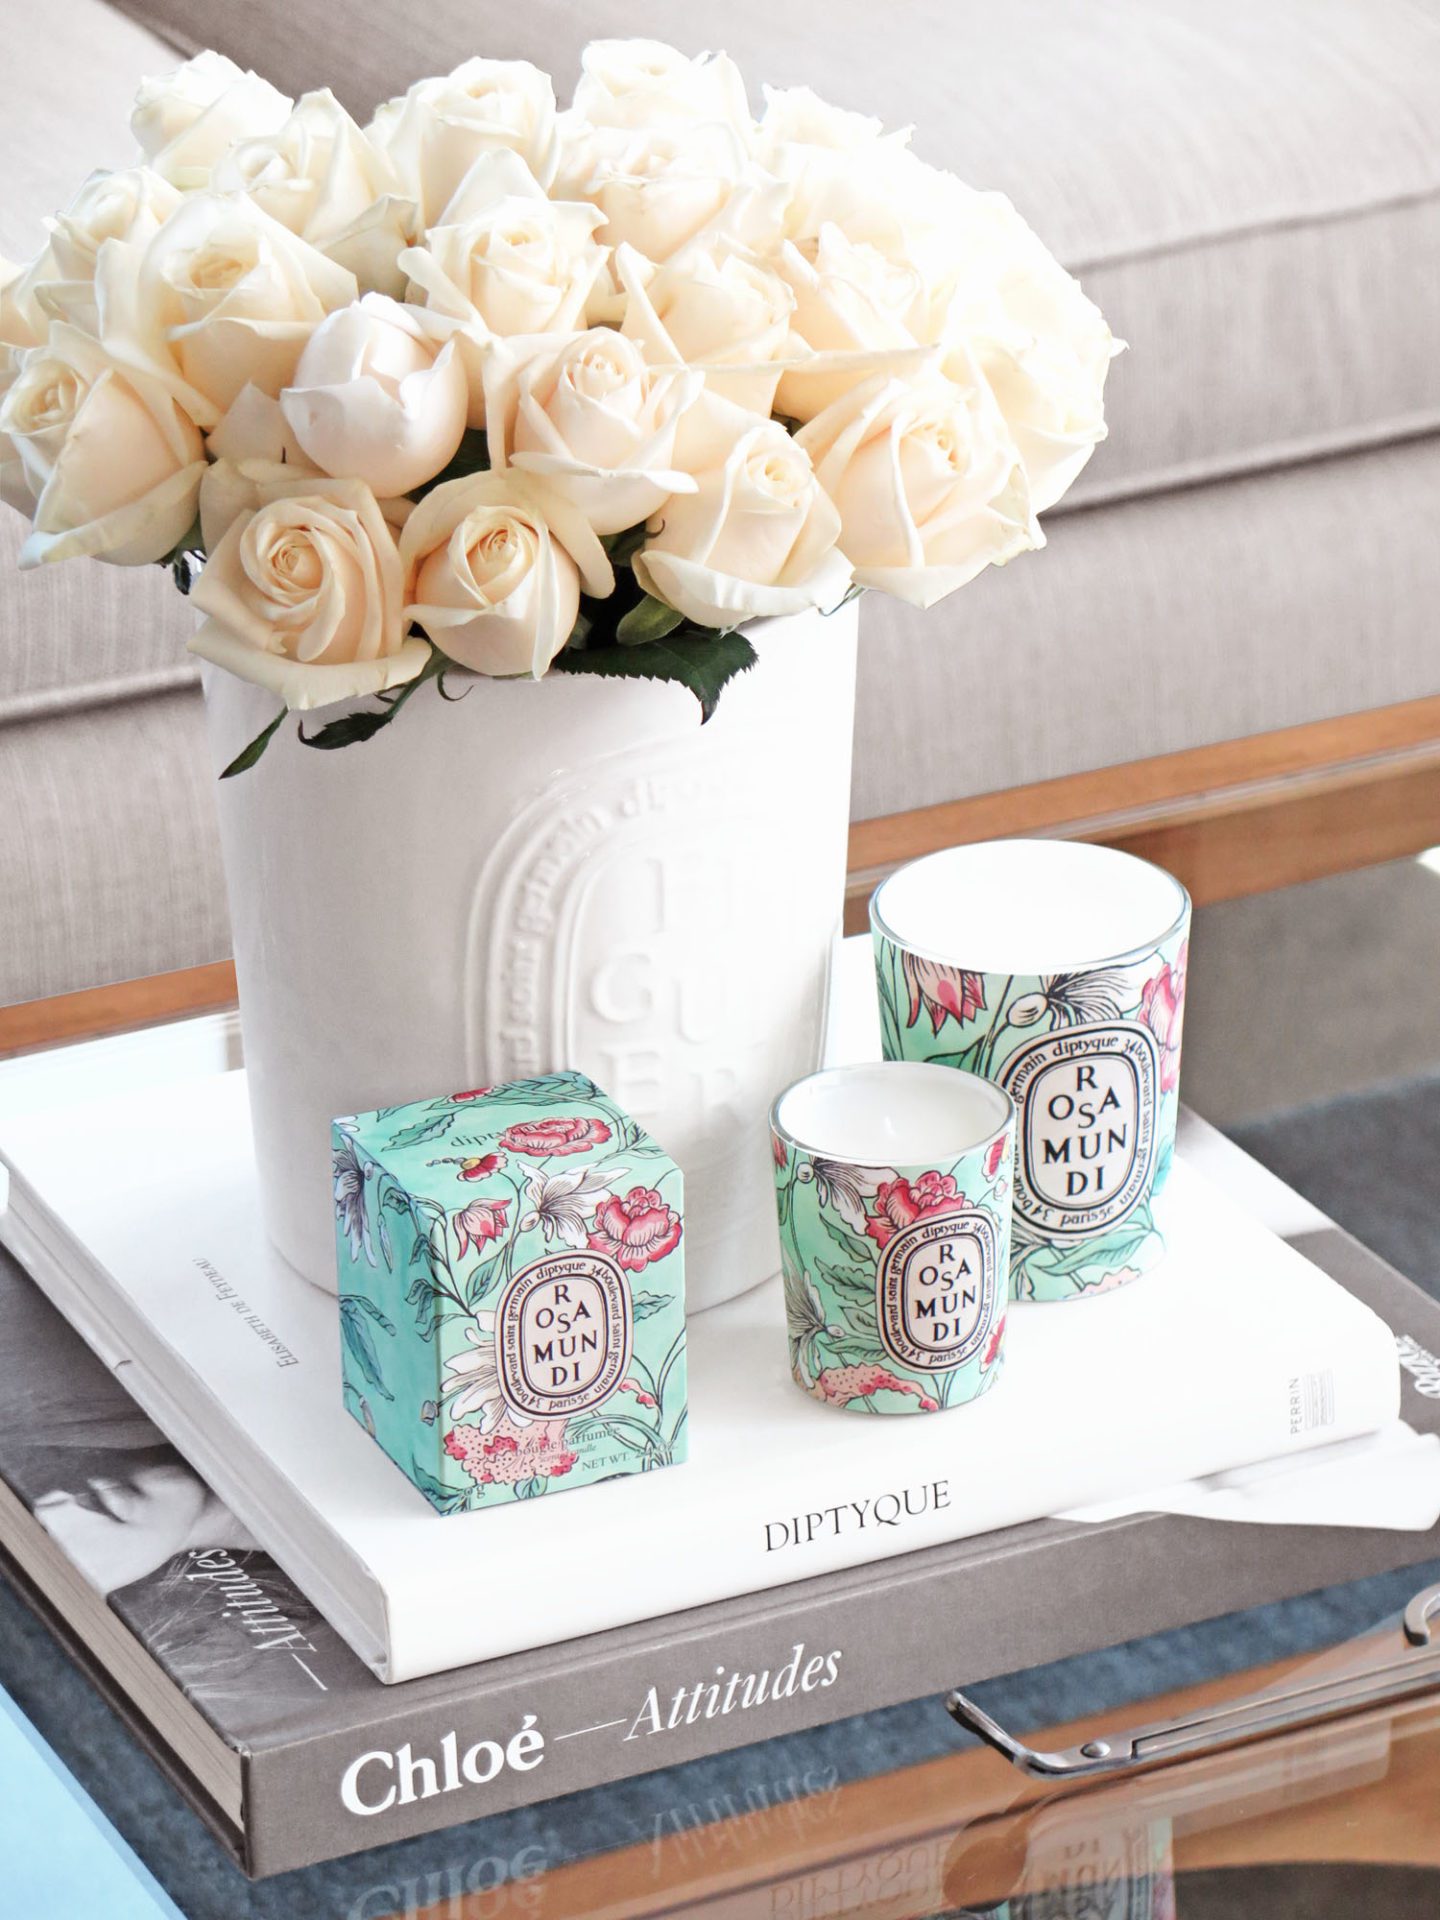 Diptyque Rosa Mundi Candle Review | The Beauty Look Book